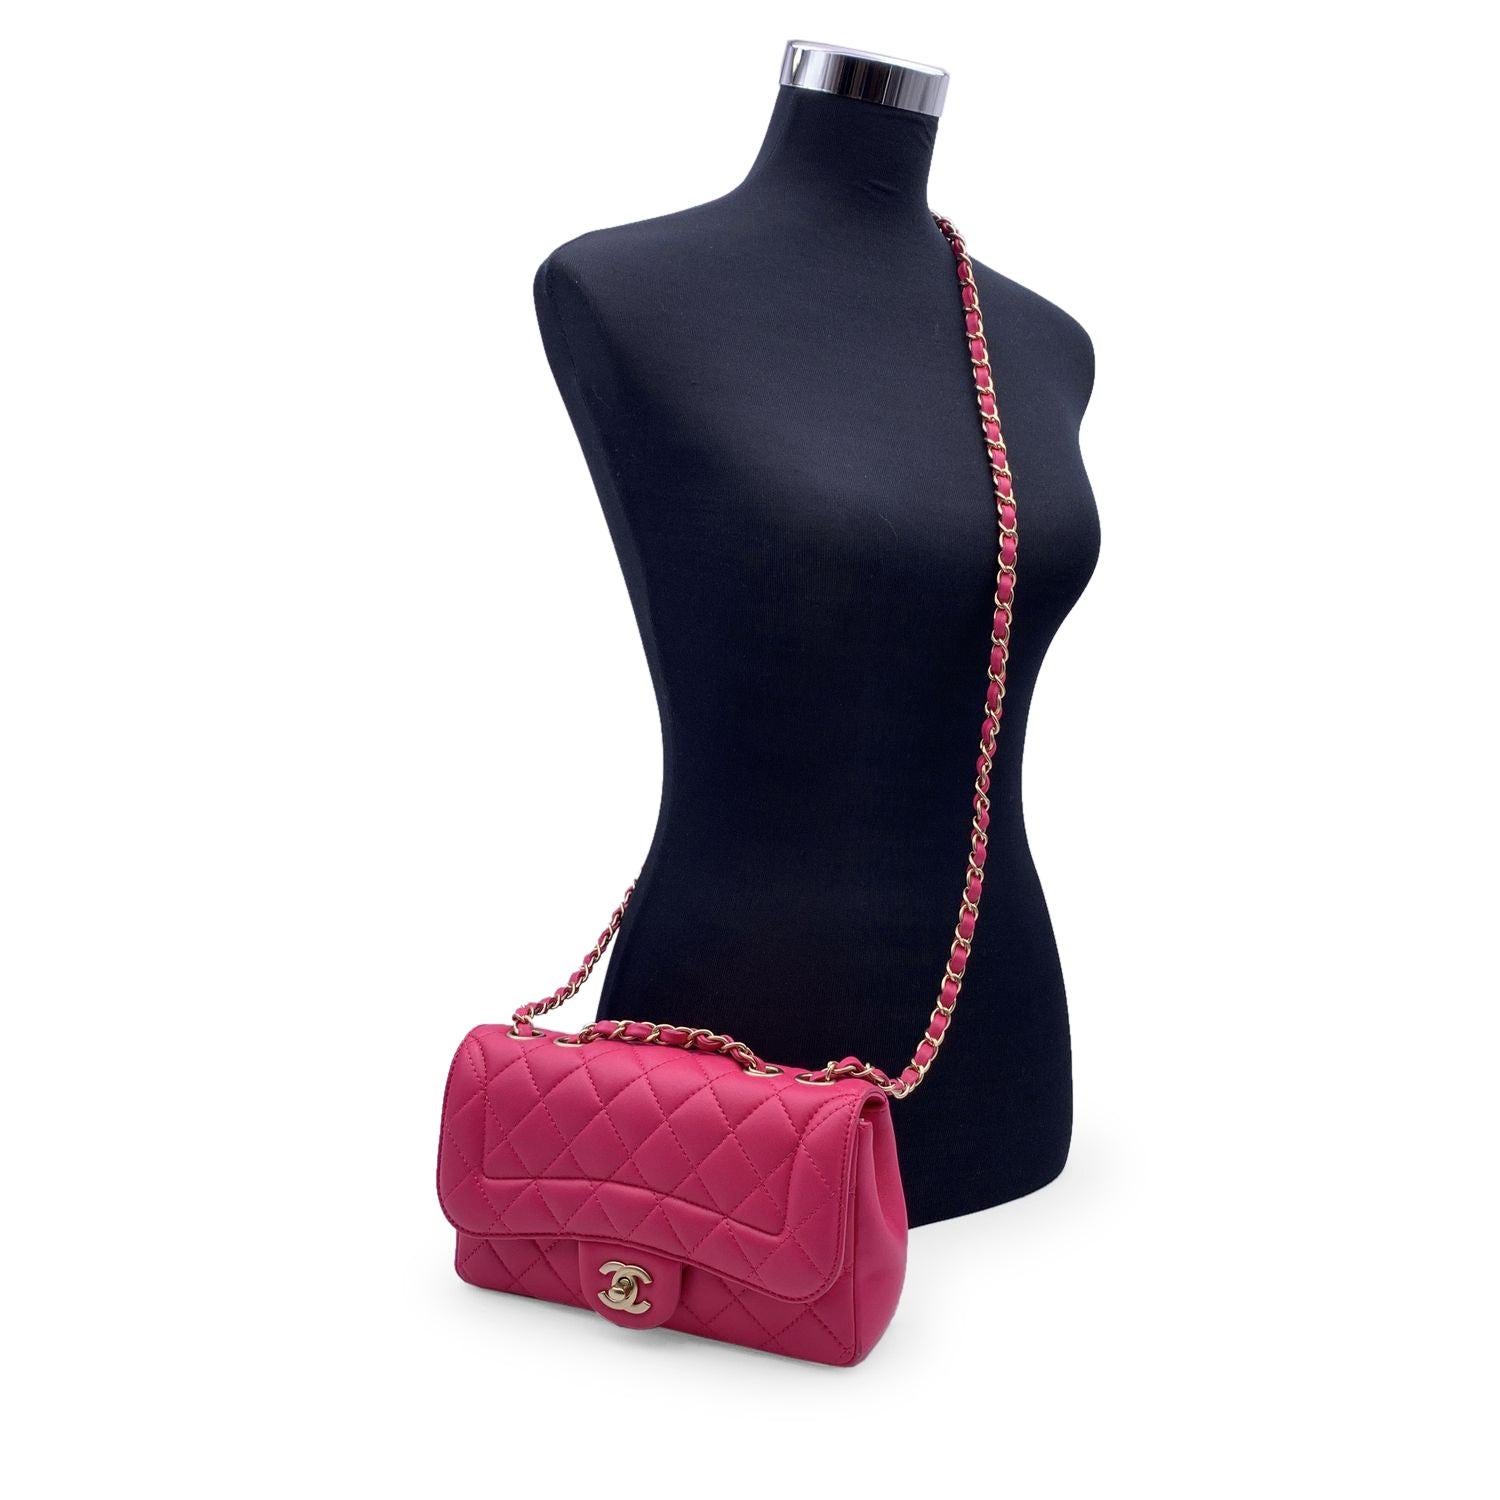 Lovely Chanel 'Mini Mademoiselle Chic' Flap shoulder bag. Pink fuchsia quilted lambskin leather. Light matte gold metal hardware. Period/Era: 2016. It features double 'CC' turn lock closure. Interwoven chain/leather strap; can be worn on the